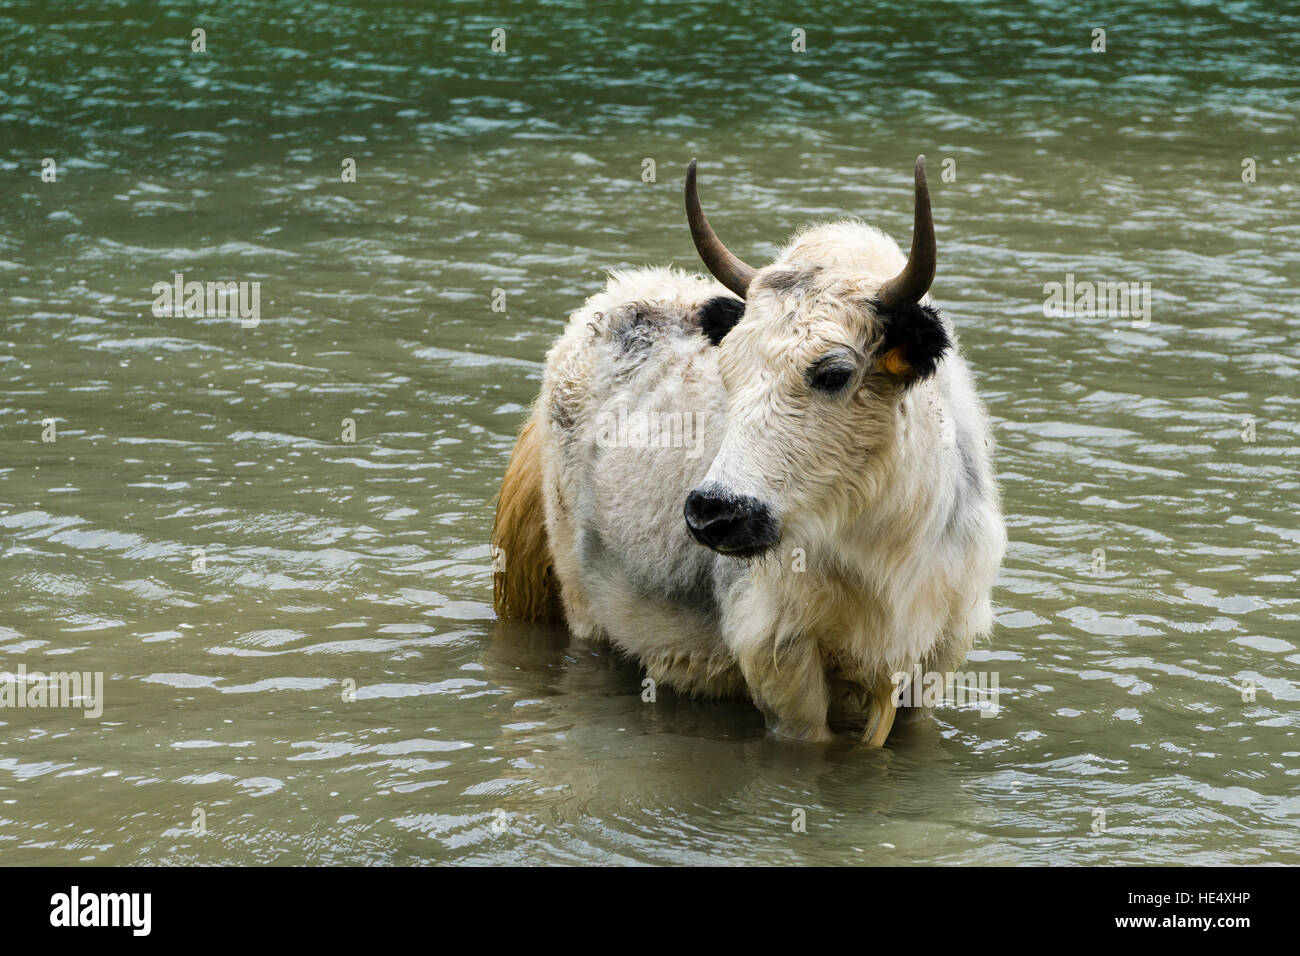 A white yak is standing in the water of Ice Lake Stock Photo